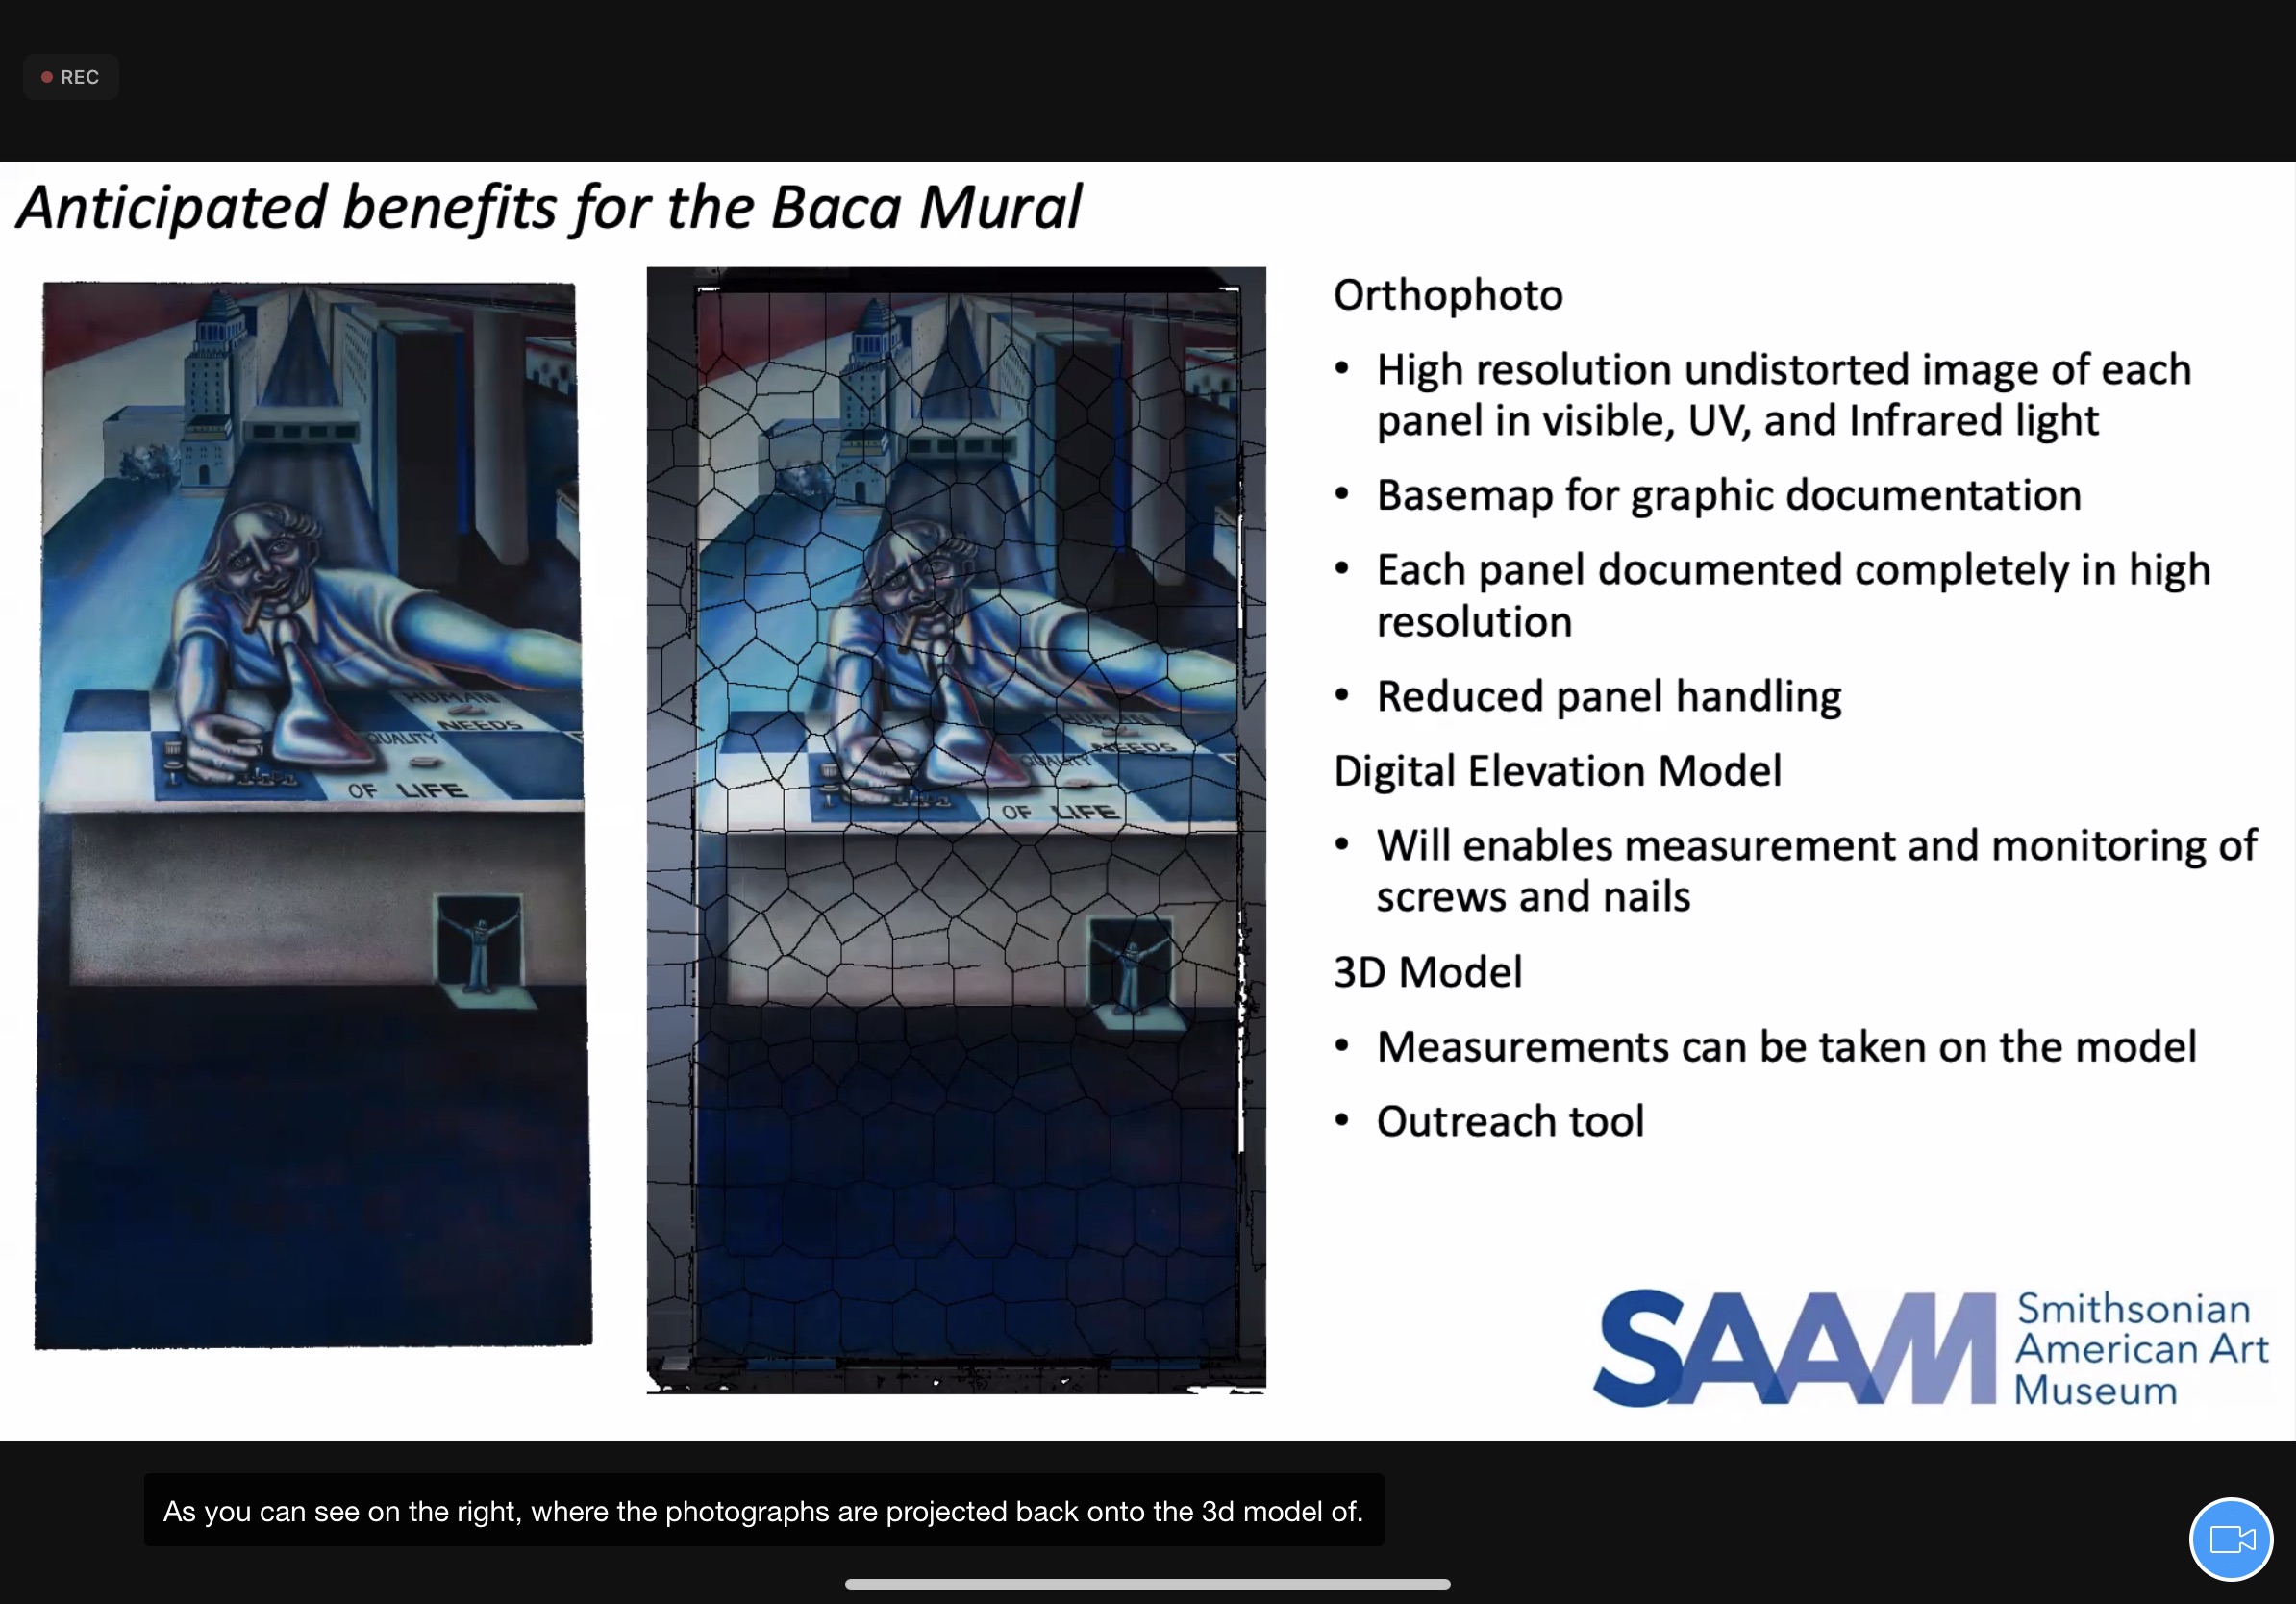 Screenshot from a virtual presentation. On the left, two photos of the mural, one with an uneven grid overlay demonstrating photographs being projected back onto the 3D model.